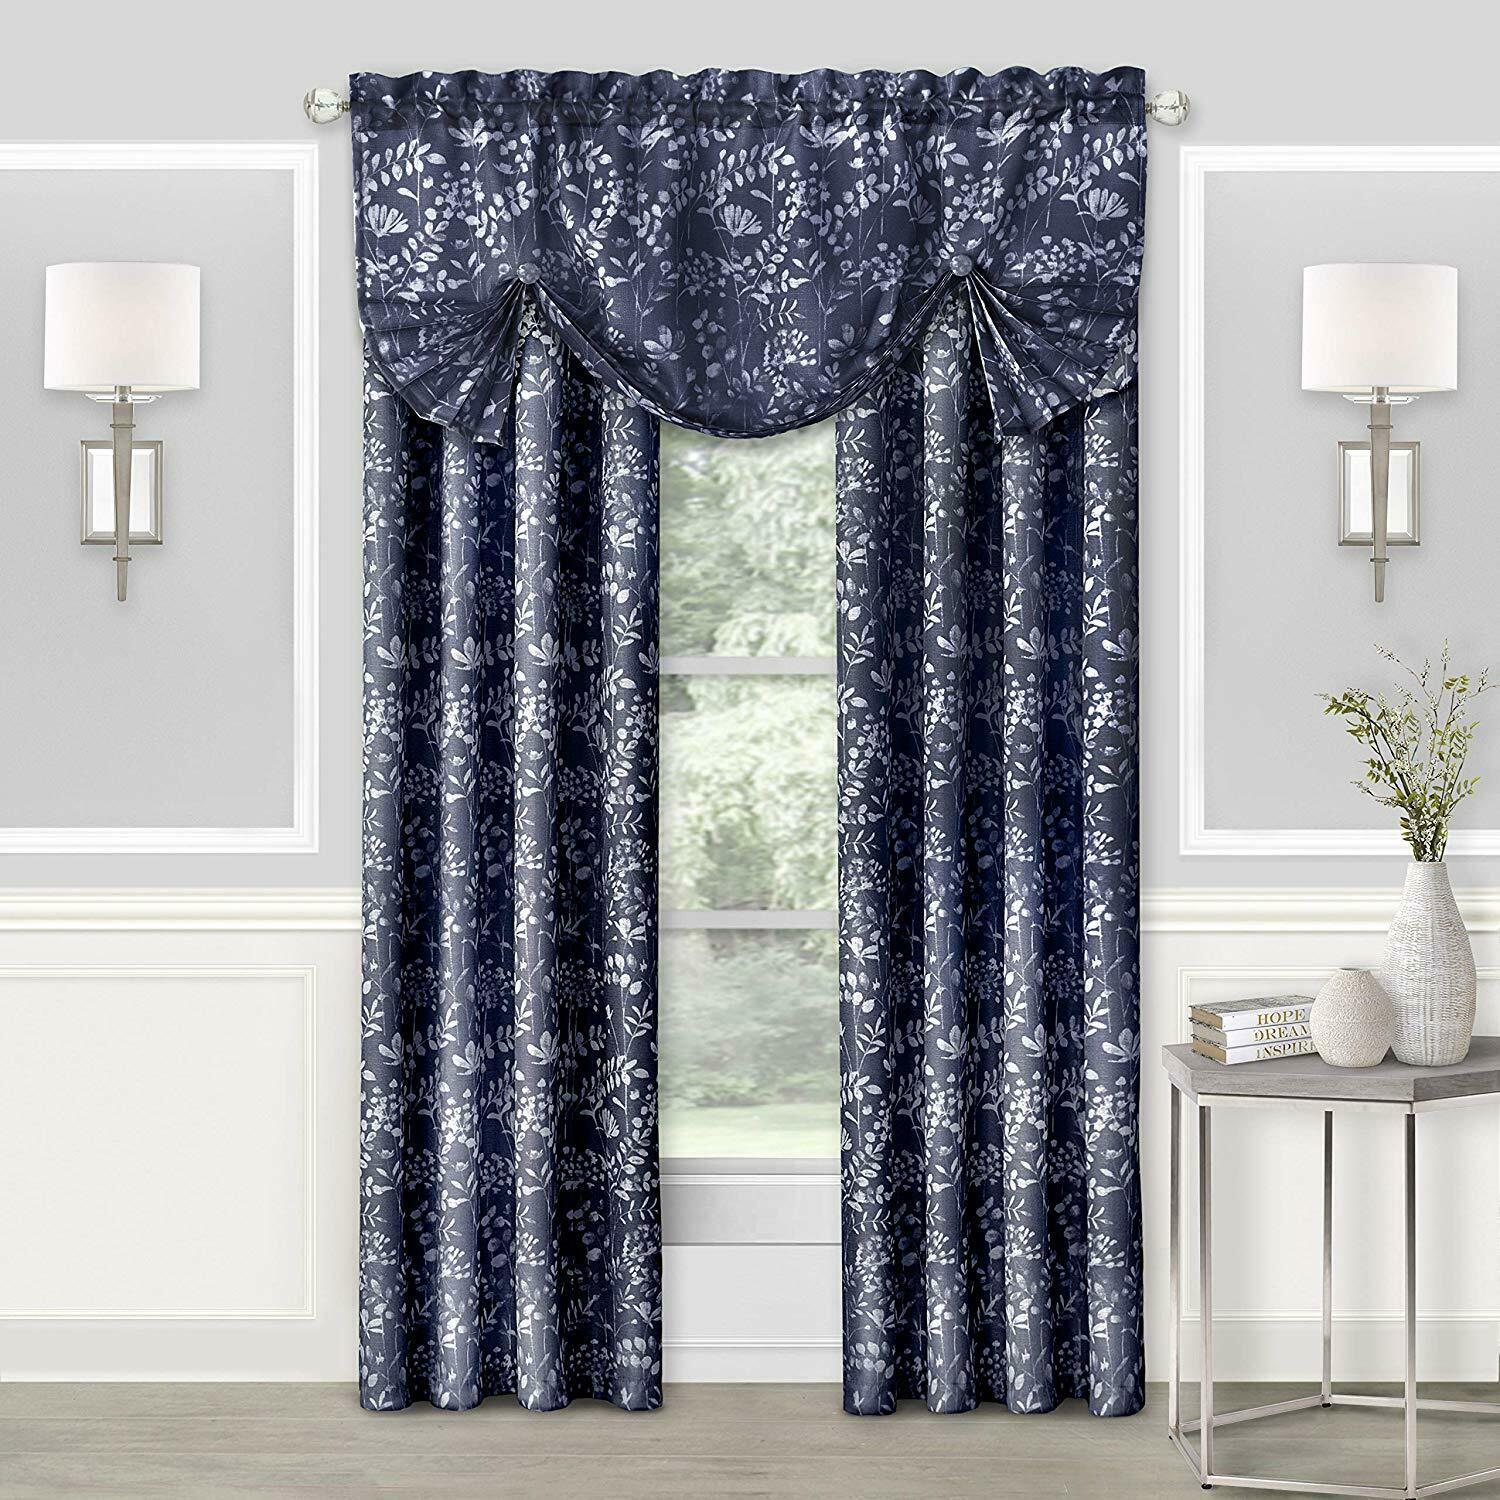 Soft Floral Window Curtain Semi-Sheer Privacy Panels Pleated Valance, Navy Blue | Decor Gifts and More